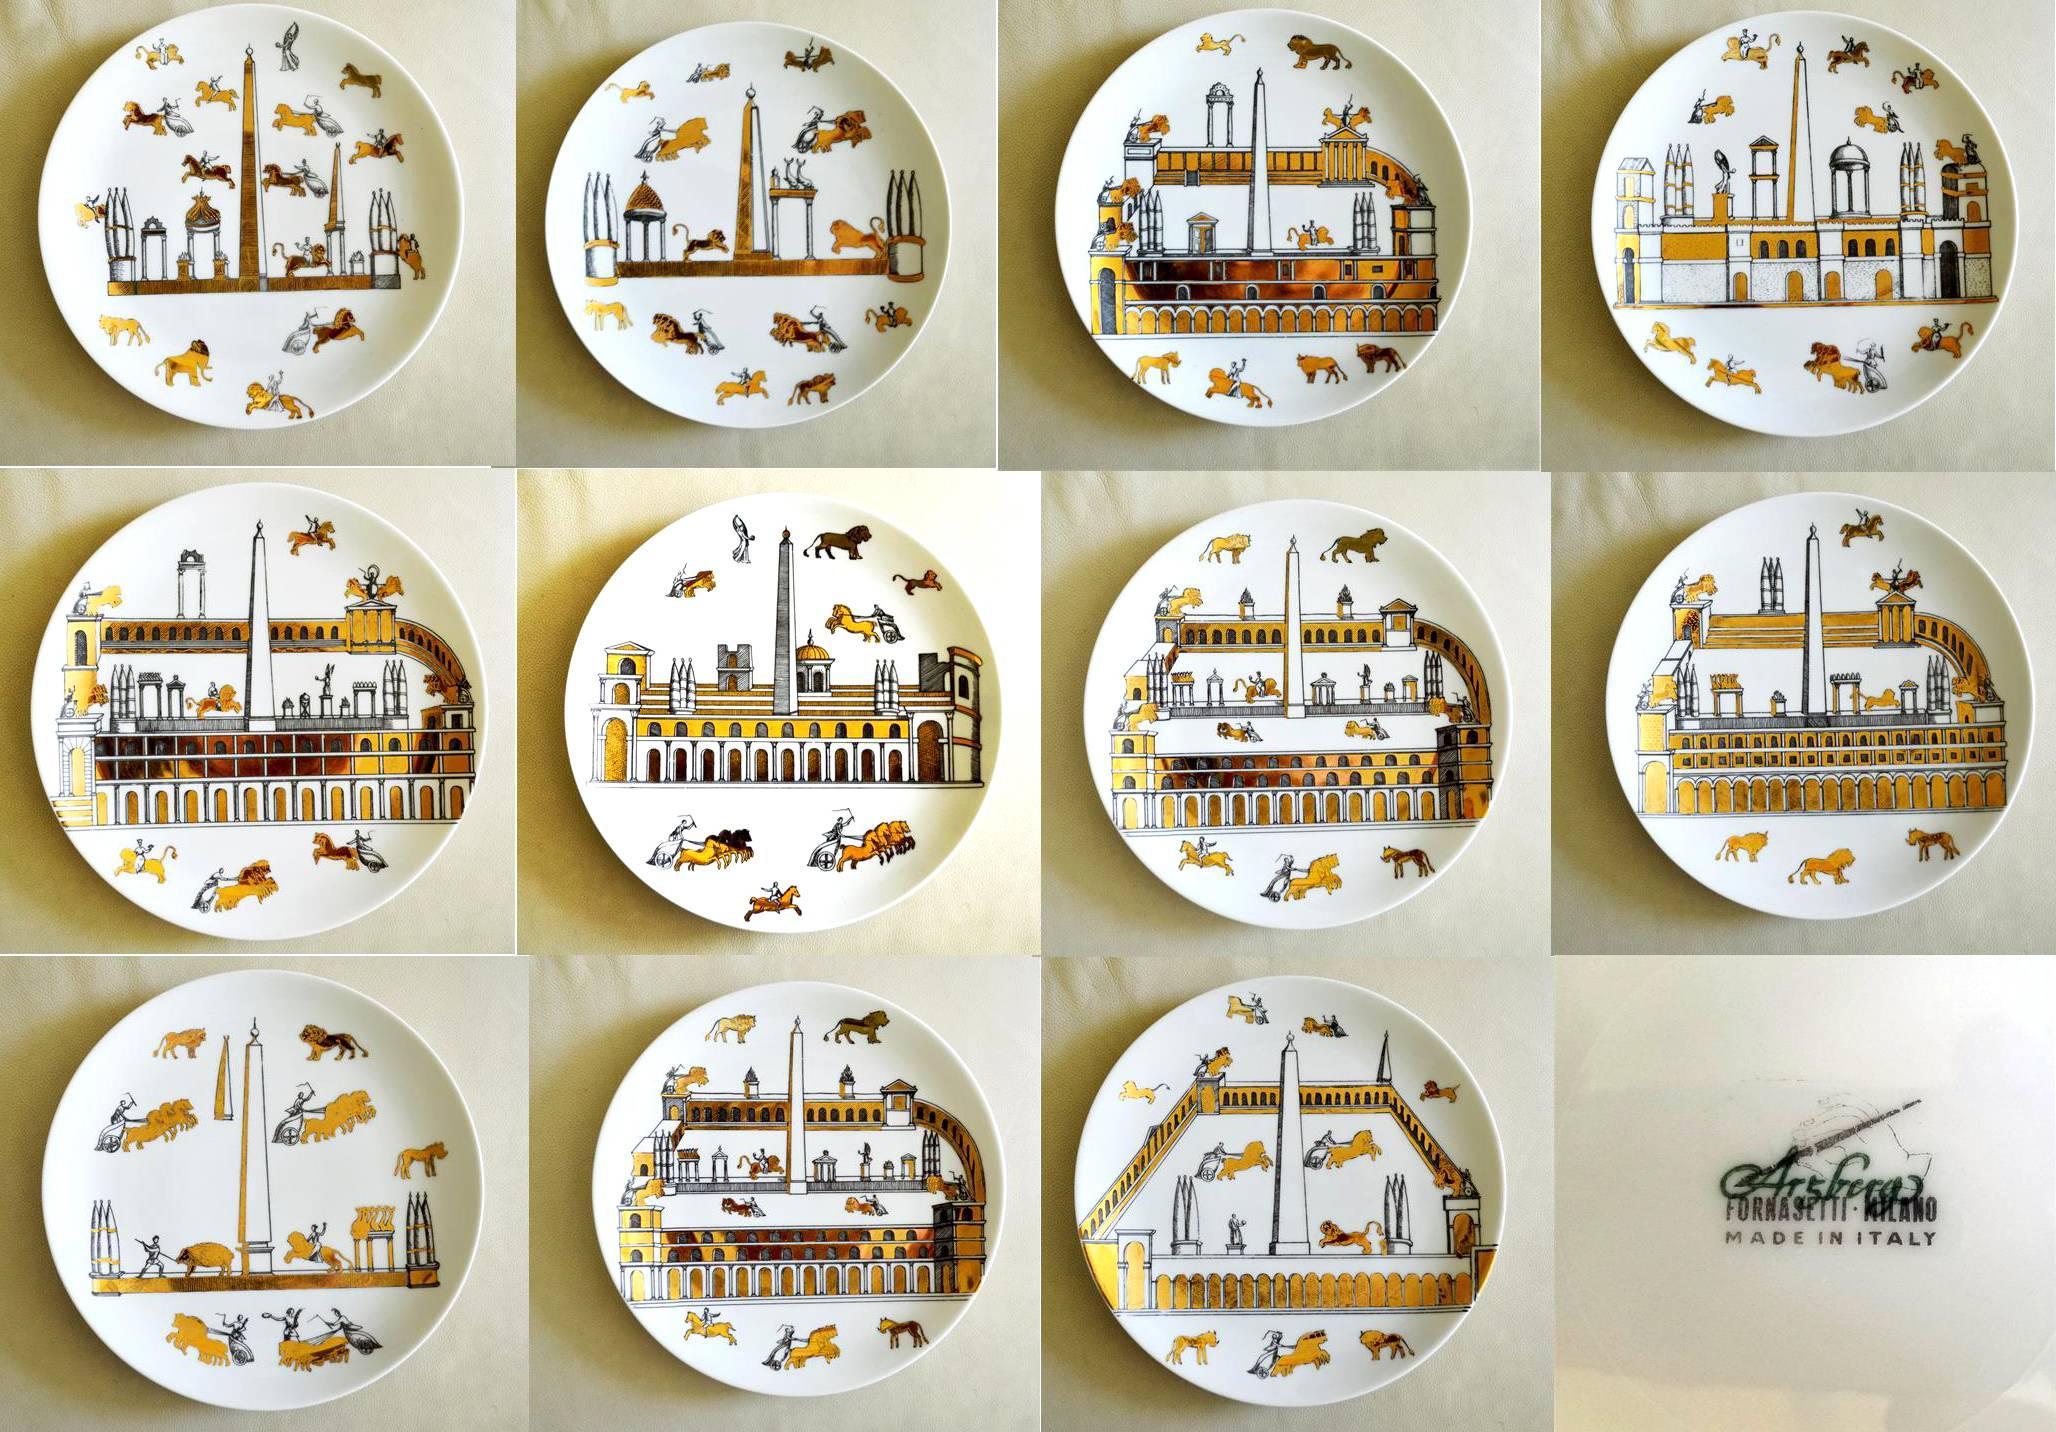 Vintage Piero Fornasetti set of nine porcelain plates,
Anfiteatro (Amphitheatre),
1960s.

Each plate is decorated distinctively with different scenes of "Ancient Rome" in black and with exotic buildings, chariots, lions and